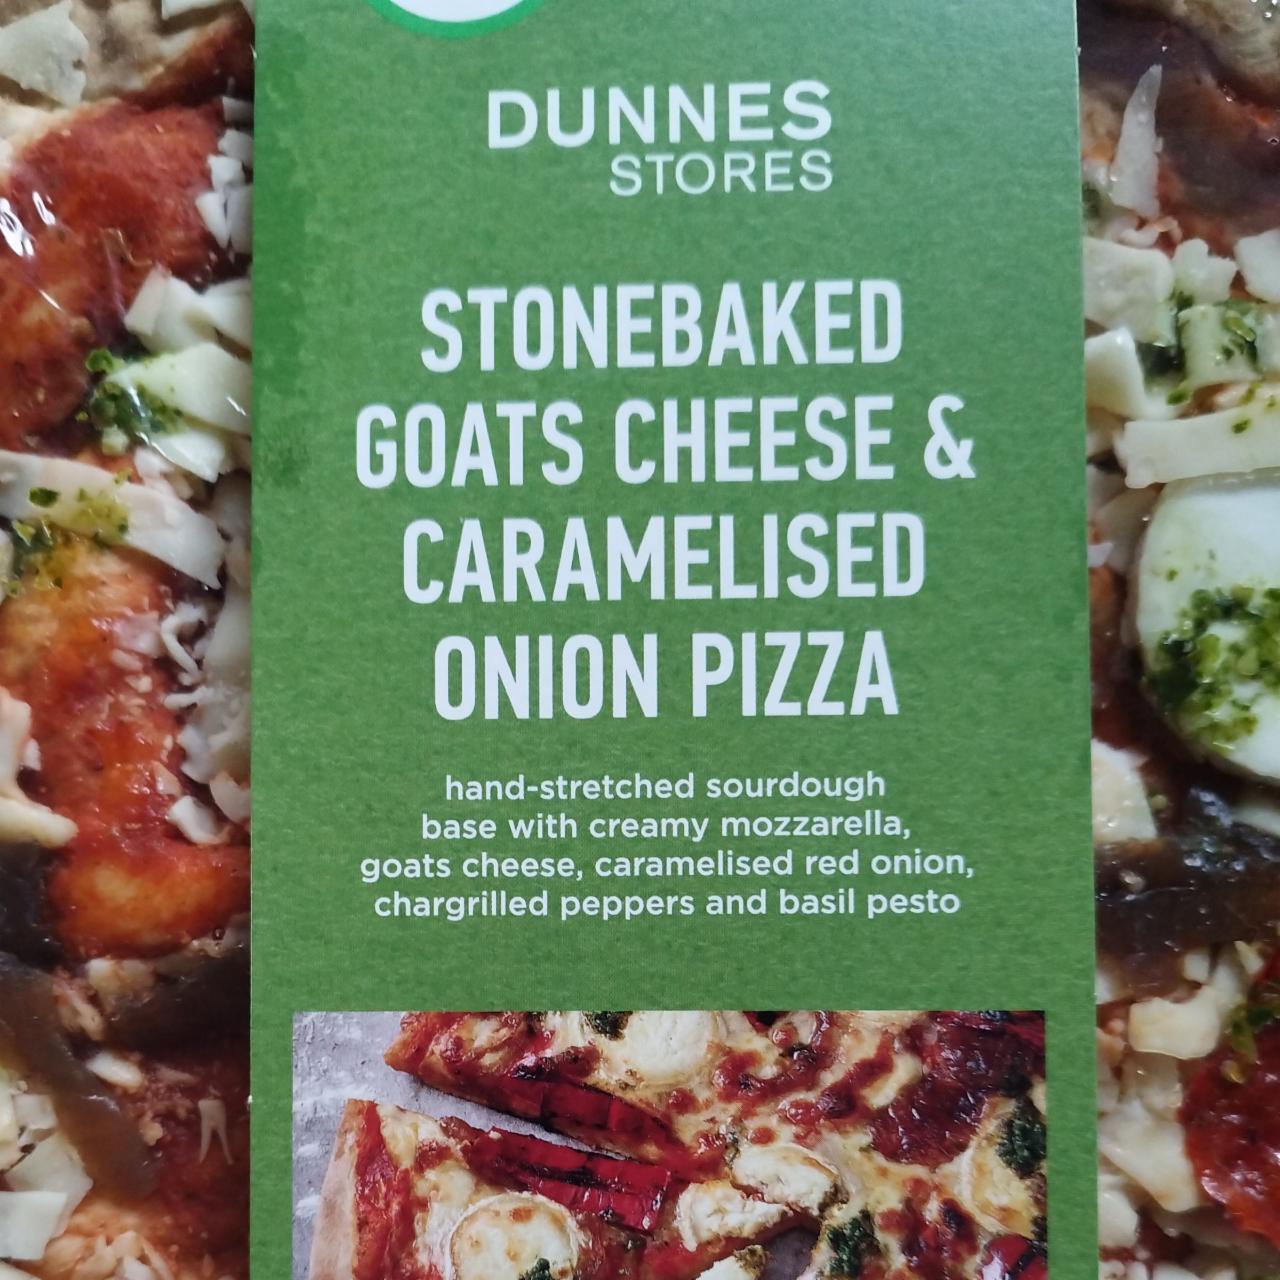 Fotografie - Stonebaked Goats Cheese & Caramelised Onion Pizza Dunnes Stores